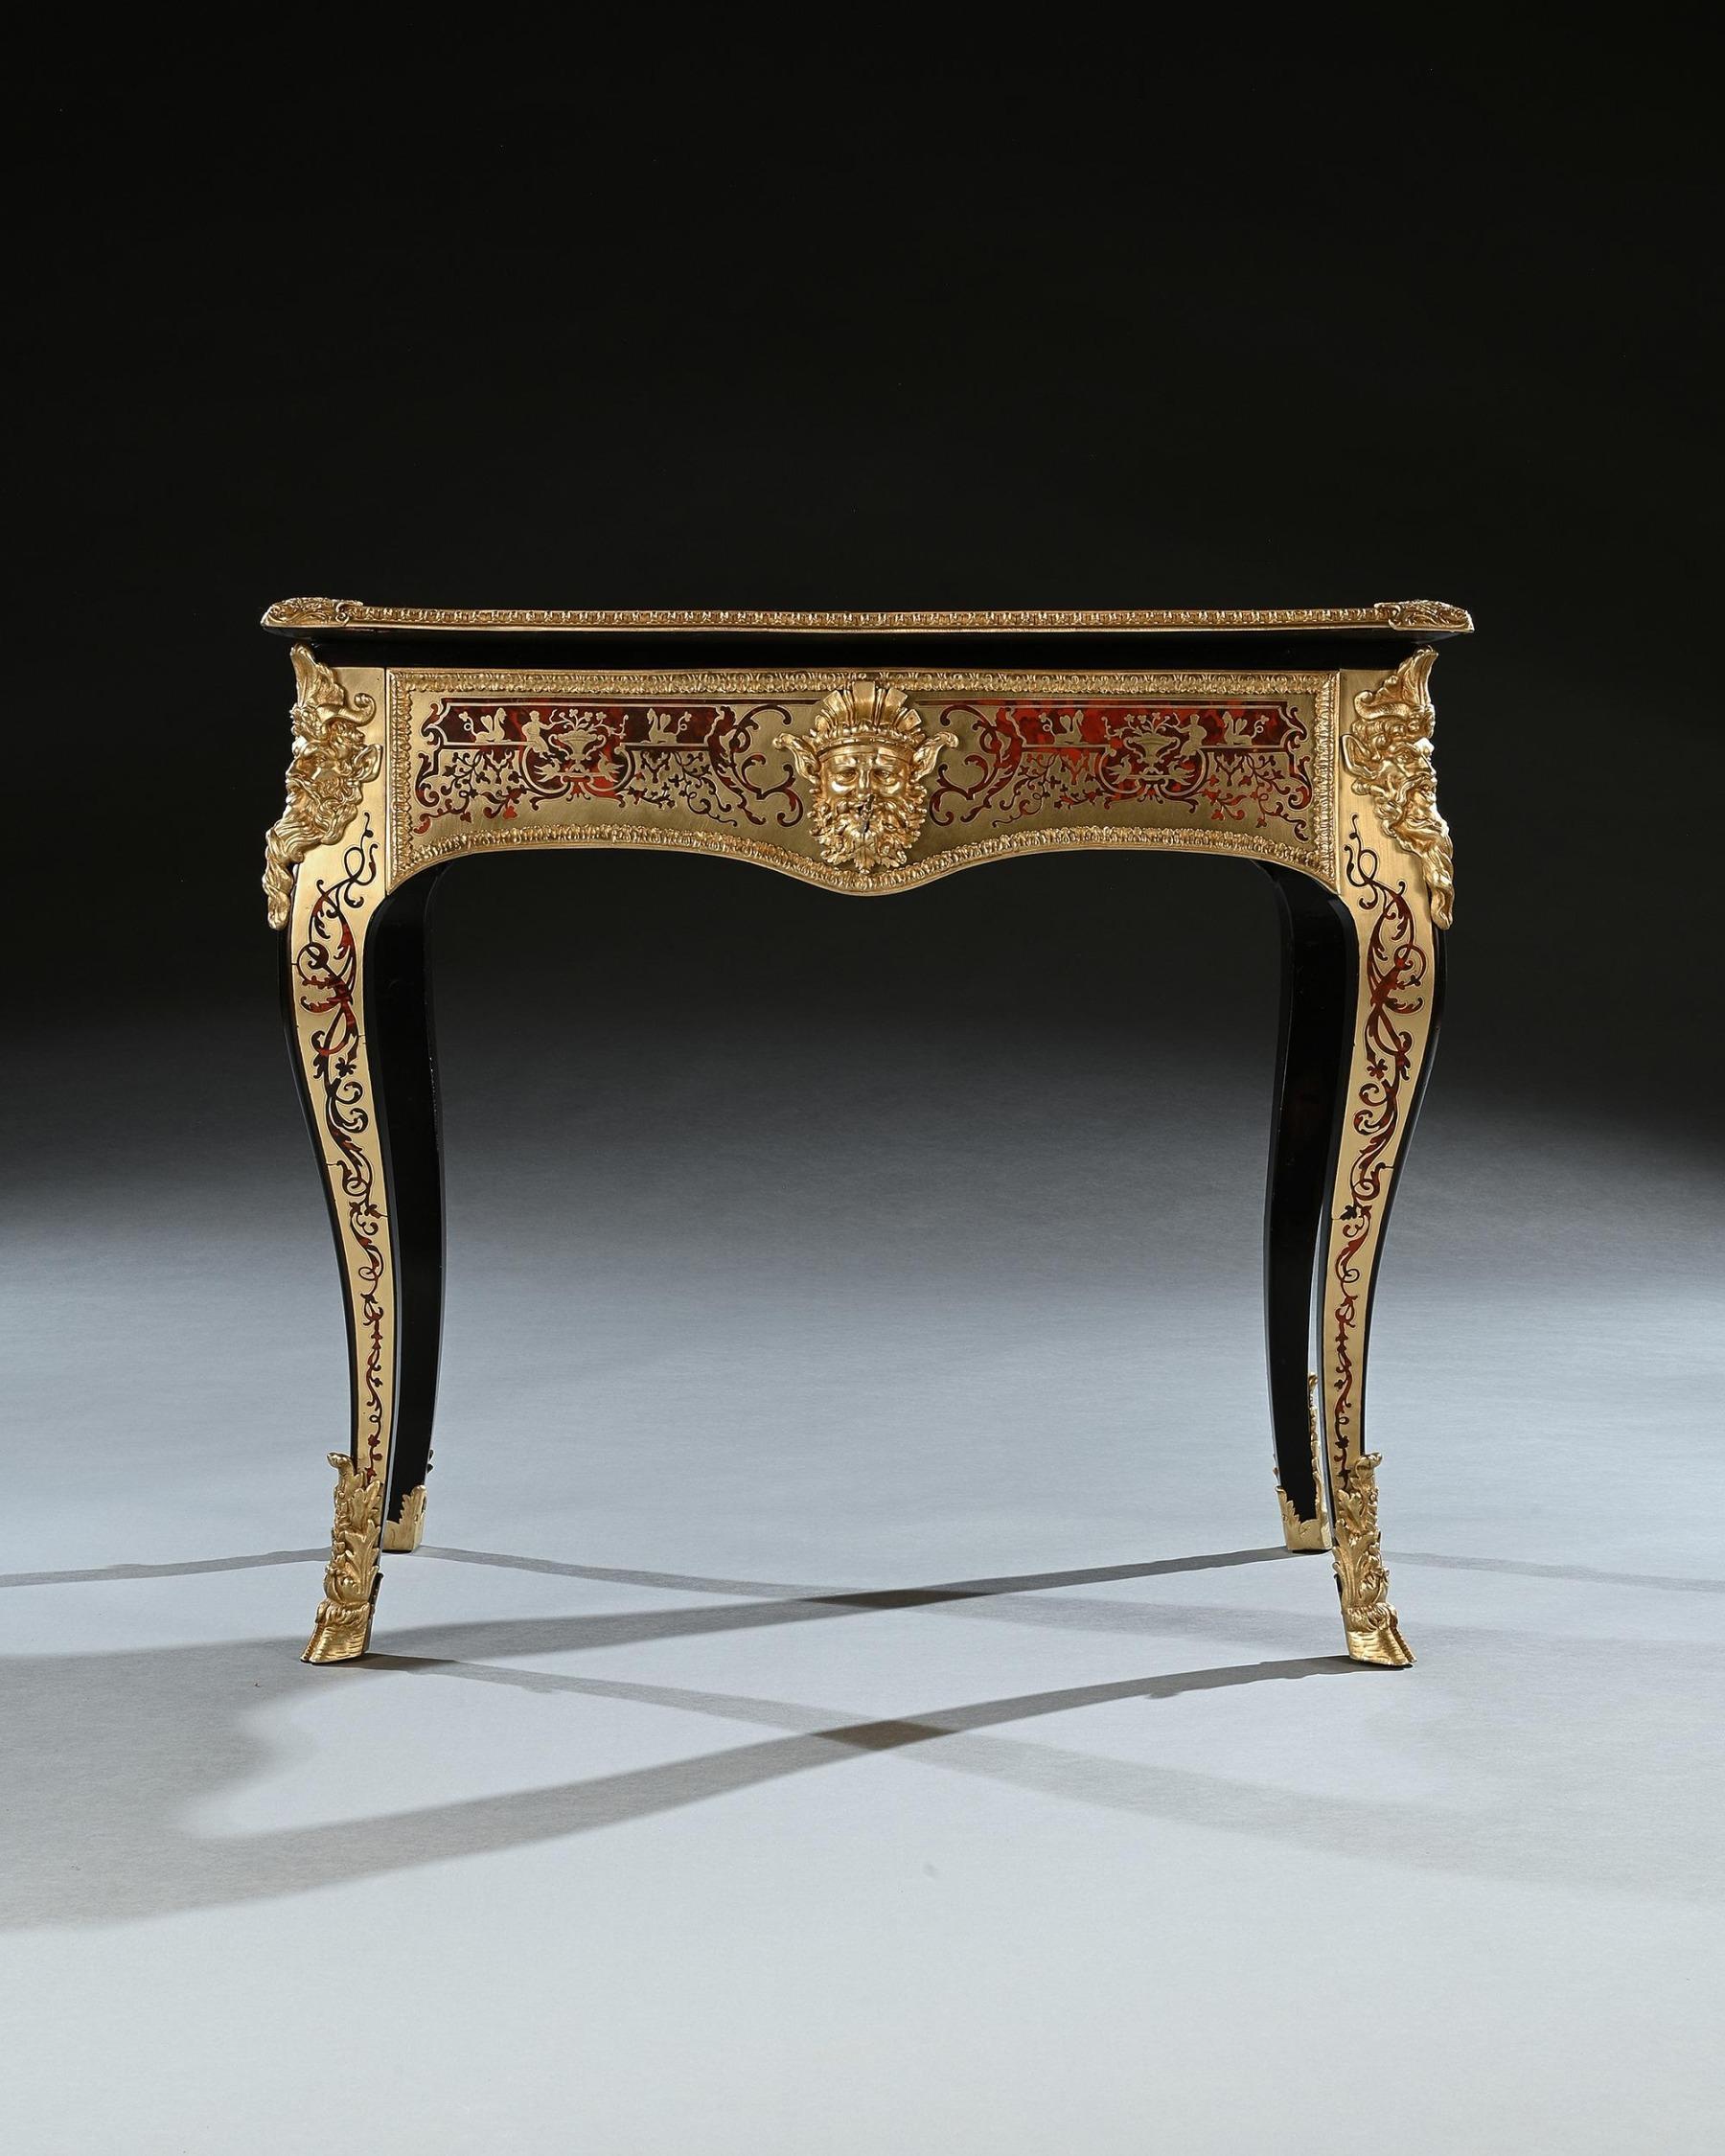 An Exceptional Boulle and Ormolu Mounted Games Table in the French Louis XVI style attributed to Thomas Parker (active 1805-1830)

English Circa 1825
 
Conceived in the most luxurious taste possible, this fine piece is an example of the Francophile